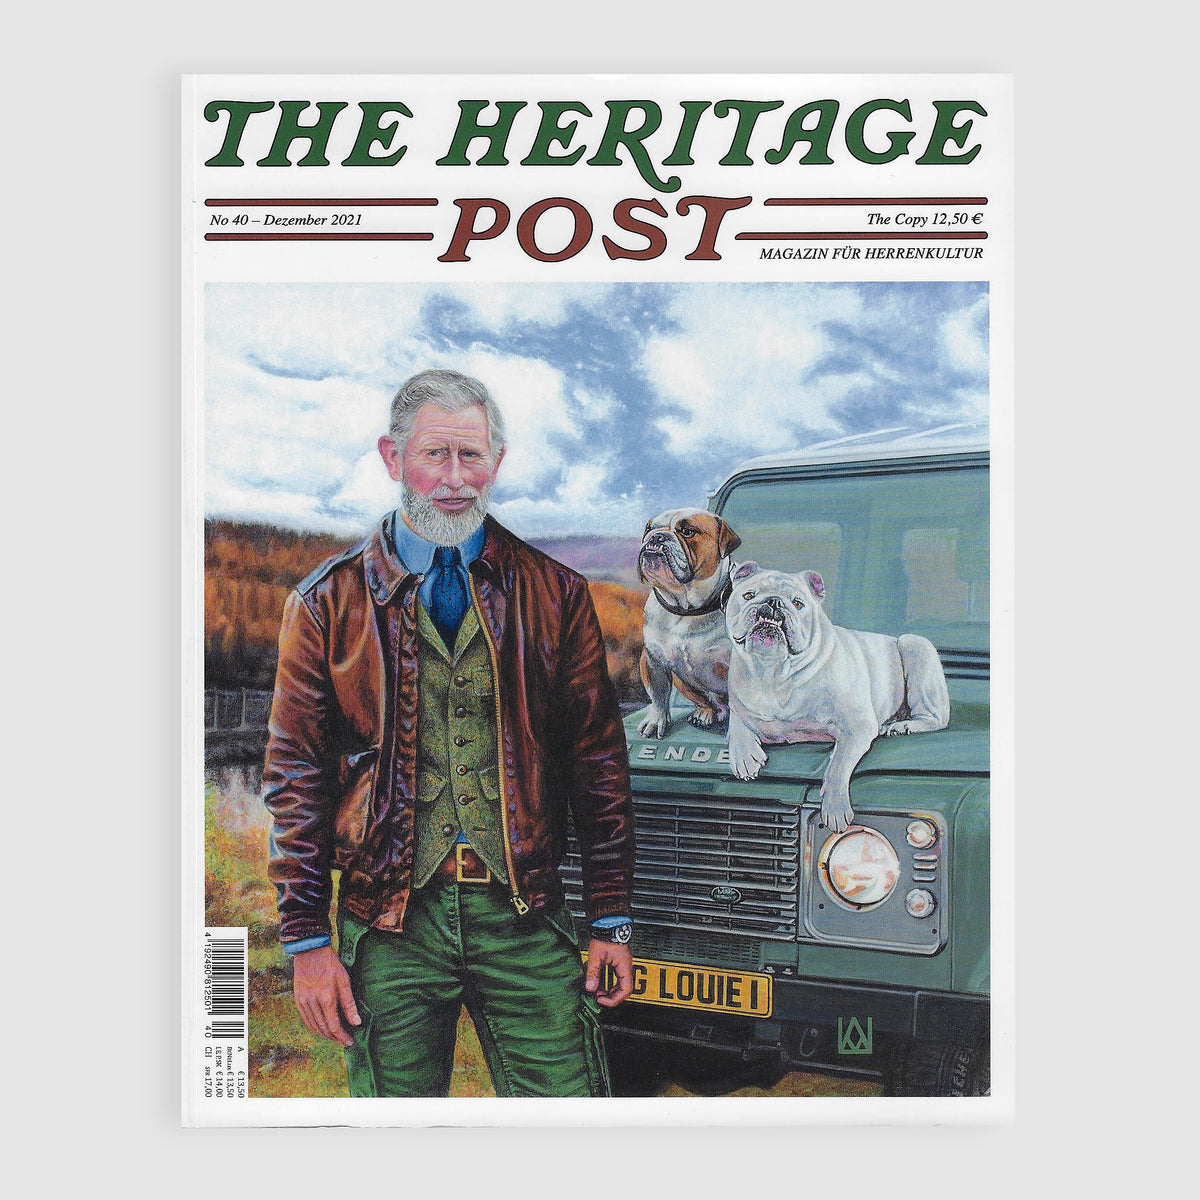 The Heritage Post No. 40